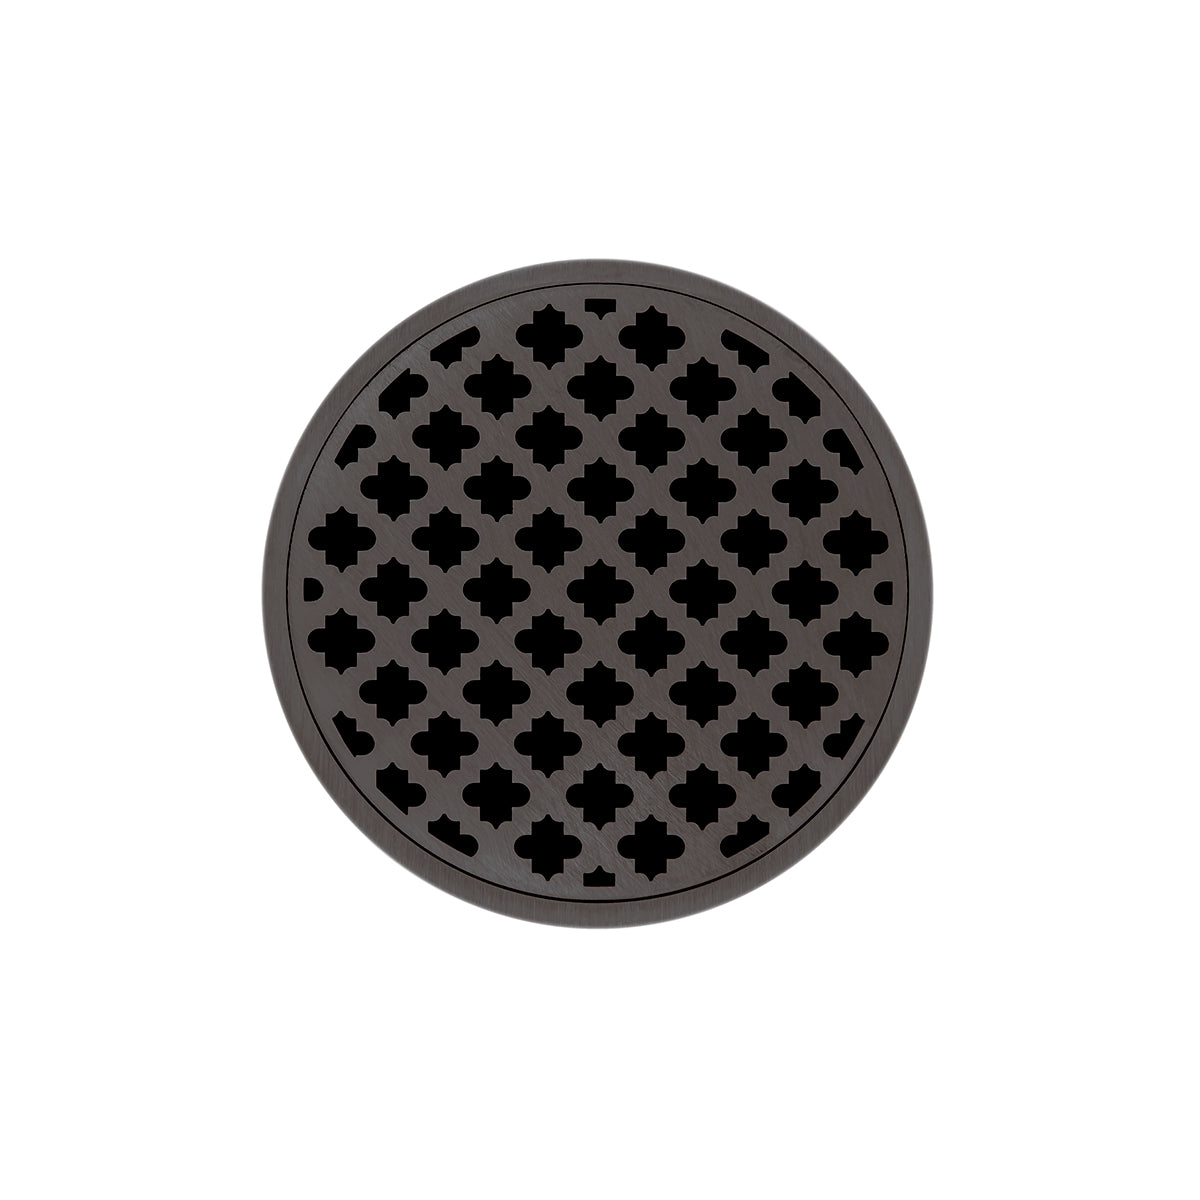 Infinity Drain 5" Round RMDB 5 Premium Center Drain Kit with Moor Pattern Decorative Plate with PVC Bonded Flange Drain Body, 2", 3" and 4" Outlet